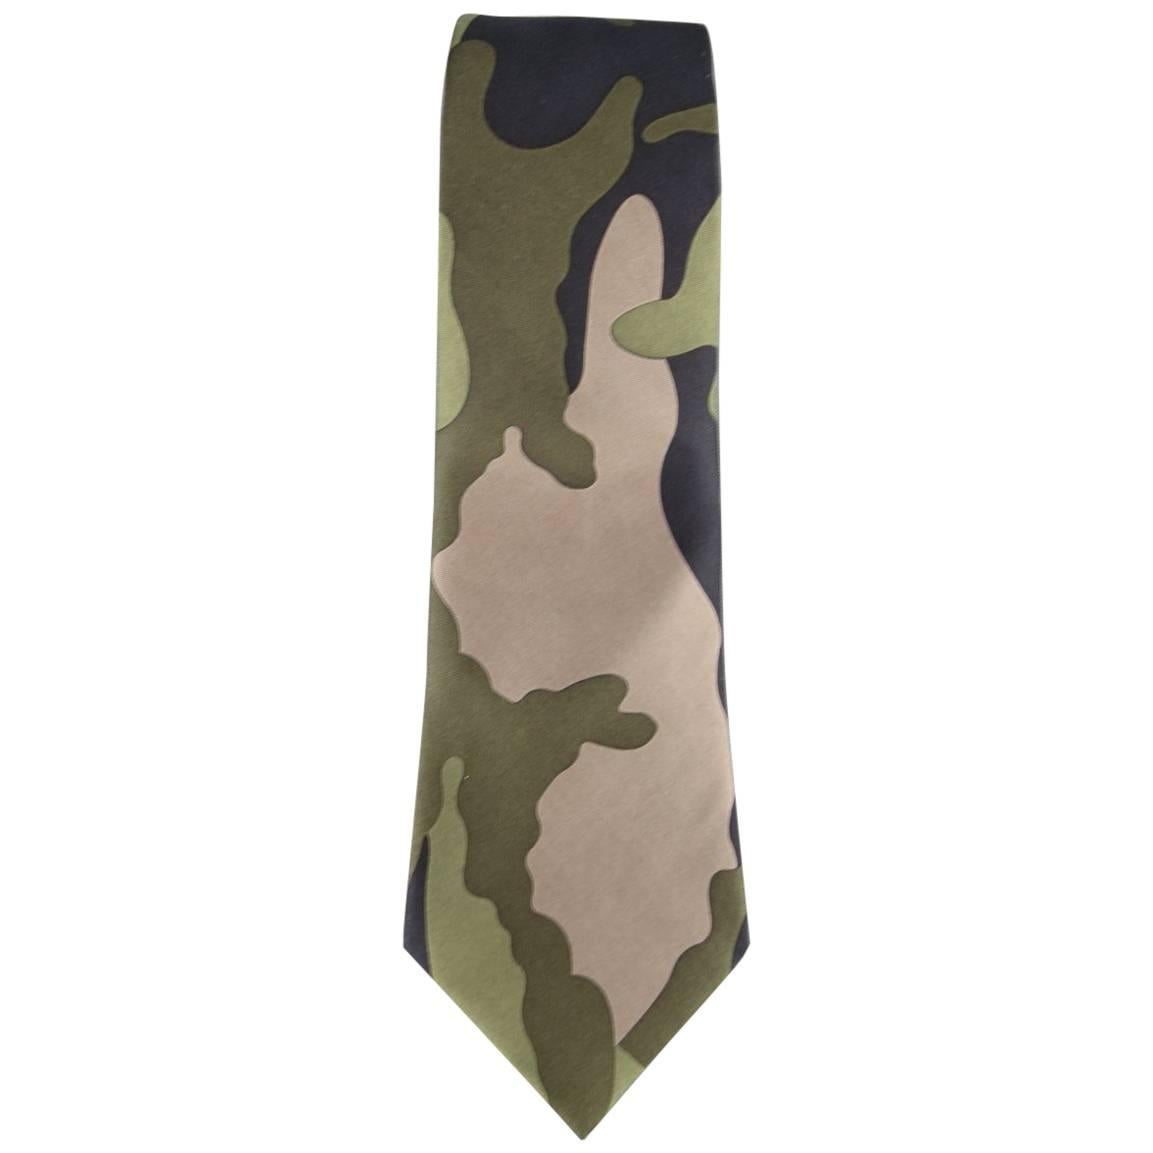 VALENTINO dress tie comes in large scale camouflage print with hues of olive gre